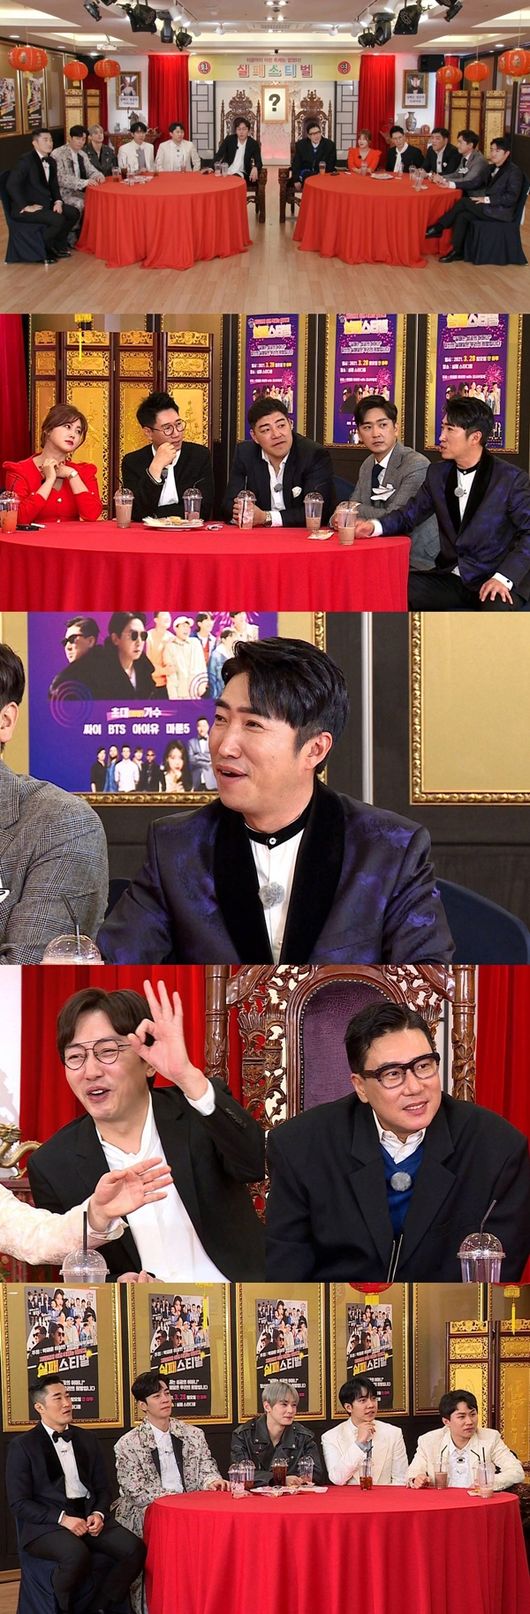 The second half of the Failure Festival, which celebrates Failure on SBS All The Butlers, begins.On the 28th, the festival scene, which is not seen anywhere, will be revealed by the Failure people of all ages.Ji Seok-jin, Shim Soo-chang, Kim Min-soo, Jang Dong-min and Solbi, who are in the Failure Star TOP5, are expected to play in all-time.All of them initially denied the title of Failure In, but over time, they showed a sense of solidarity and failure of the Failure people.On the other hand, it is said that the Failure Festival has a strange Failure story of Failure stars to match its name.Jang Dong-min revealed the whole story of the 5 billion Jewelry fraud case and focused attention on the scene.He showed off a secret operation (?) that was called Operation 007 with 30 acquaintances, thinking that he could be a target of someone because he had expensive Jewelry.The members of the spectacular story of Jang Dong-min were surprised and did not shut up.The Failure Festival, a festival of the Failure people, will be held at 6:25 pm on the 28th, whether the successful finish will be made after twists and turns.SBS offer